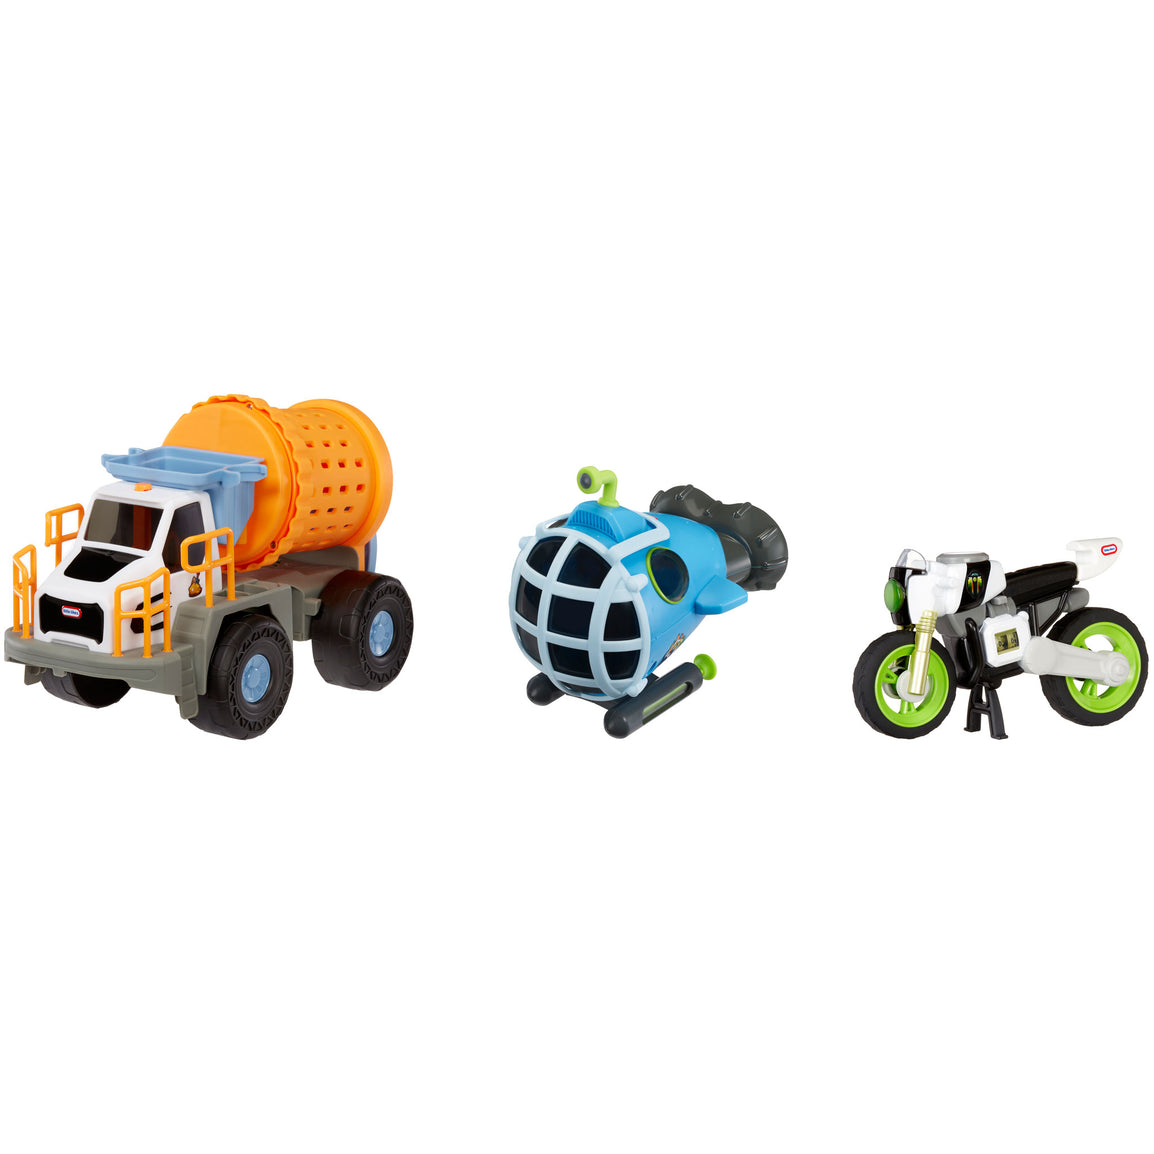 Little Riders: Exploring the World of Kids Motorcycles and Mini